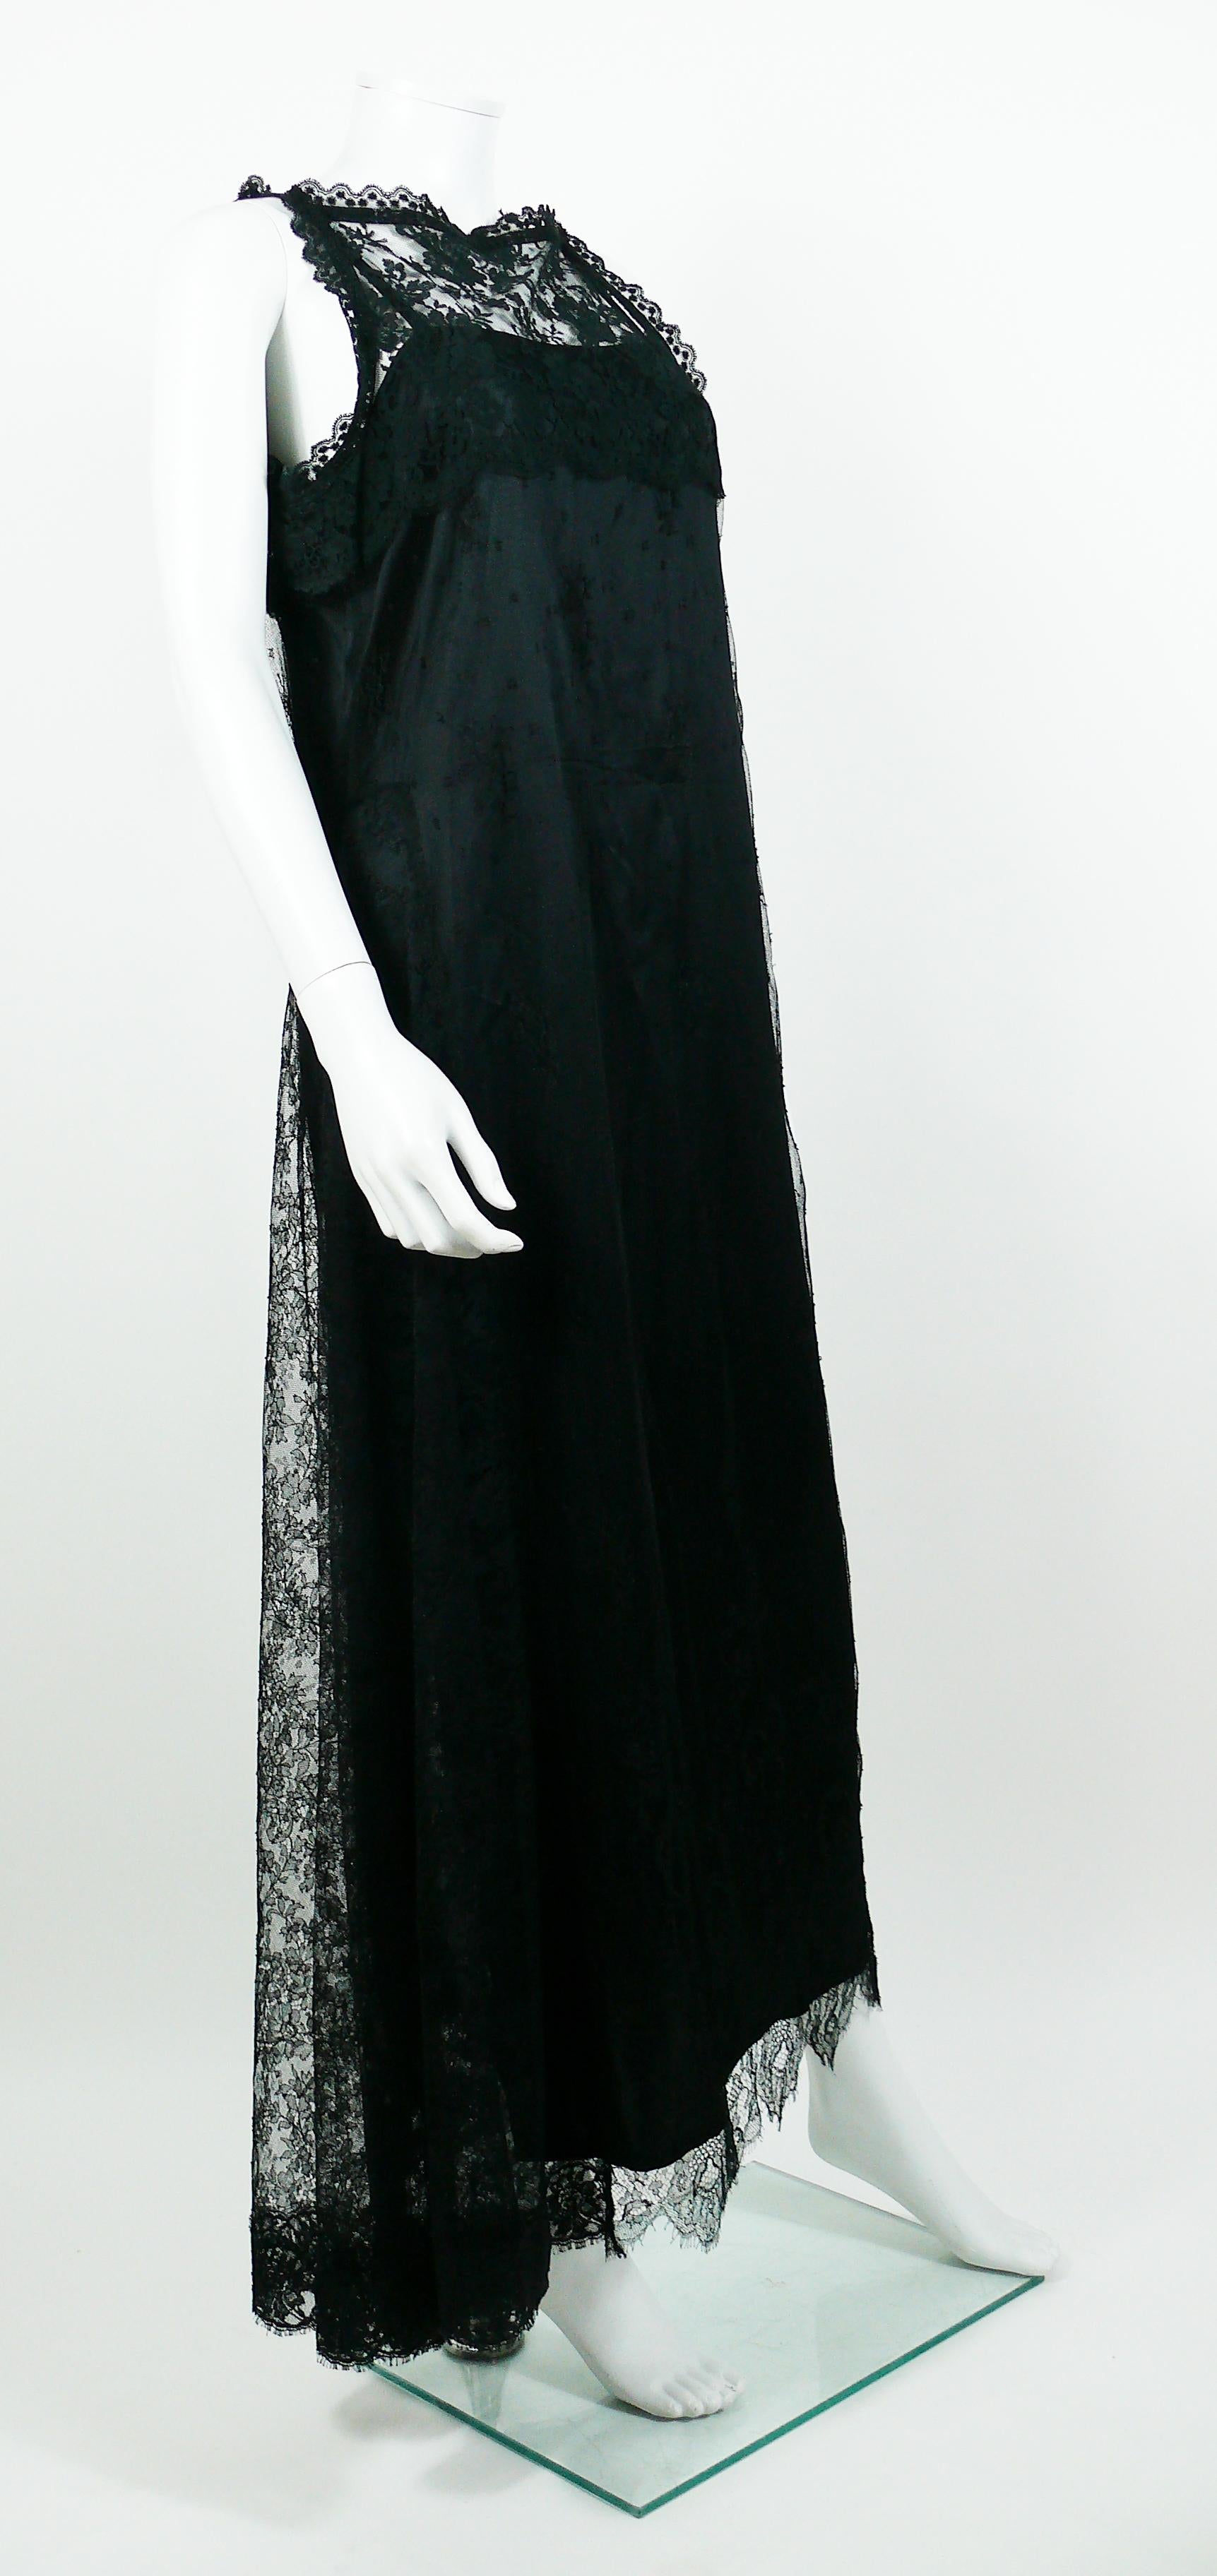 CHRISTIAN LACROIX vintage 1990s black lace maxi dress.

This dress features :
- A black lace sleeveless dress with removable black petticoat dress.
- Maxi length.
- Side slit.
- Back buttoning.
- Snap buttons on shoulders to assemble both dresses.
-